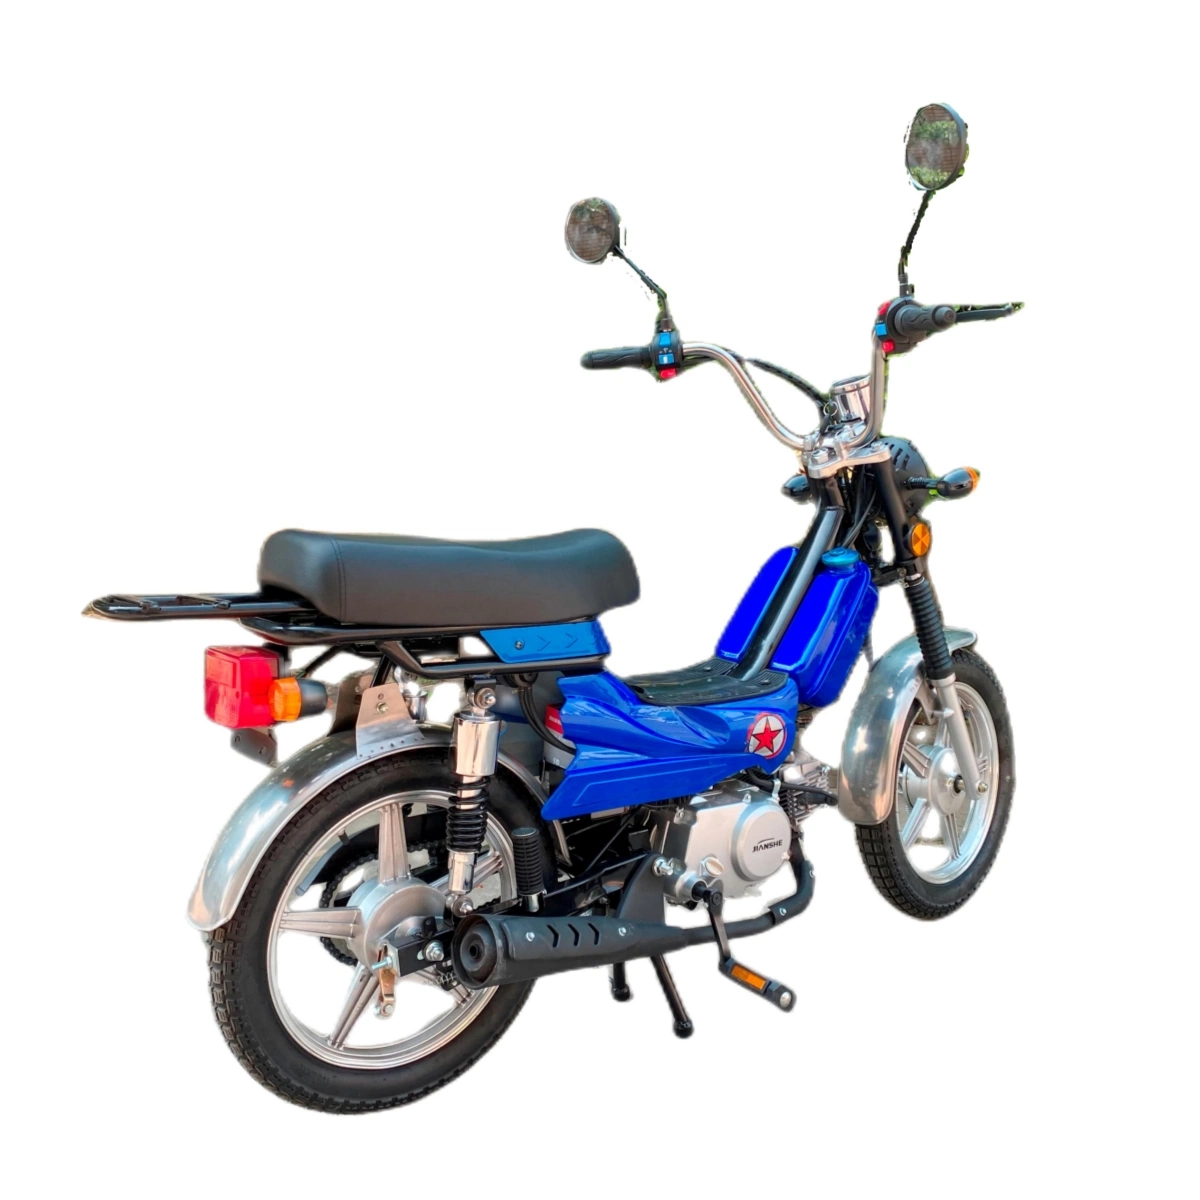 Chile Hot Sale Discount Classic EEC 50cc Gasoline Motorcycle, Mini Motorbike, Childred Small Moped, Cub Motorcycle, Gas Street Scooter Bike